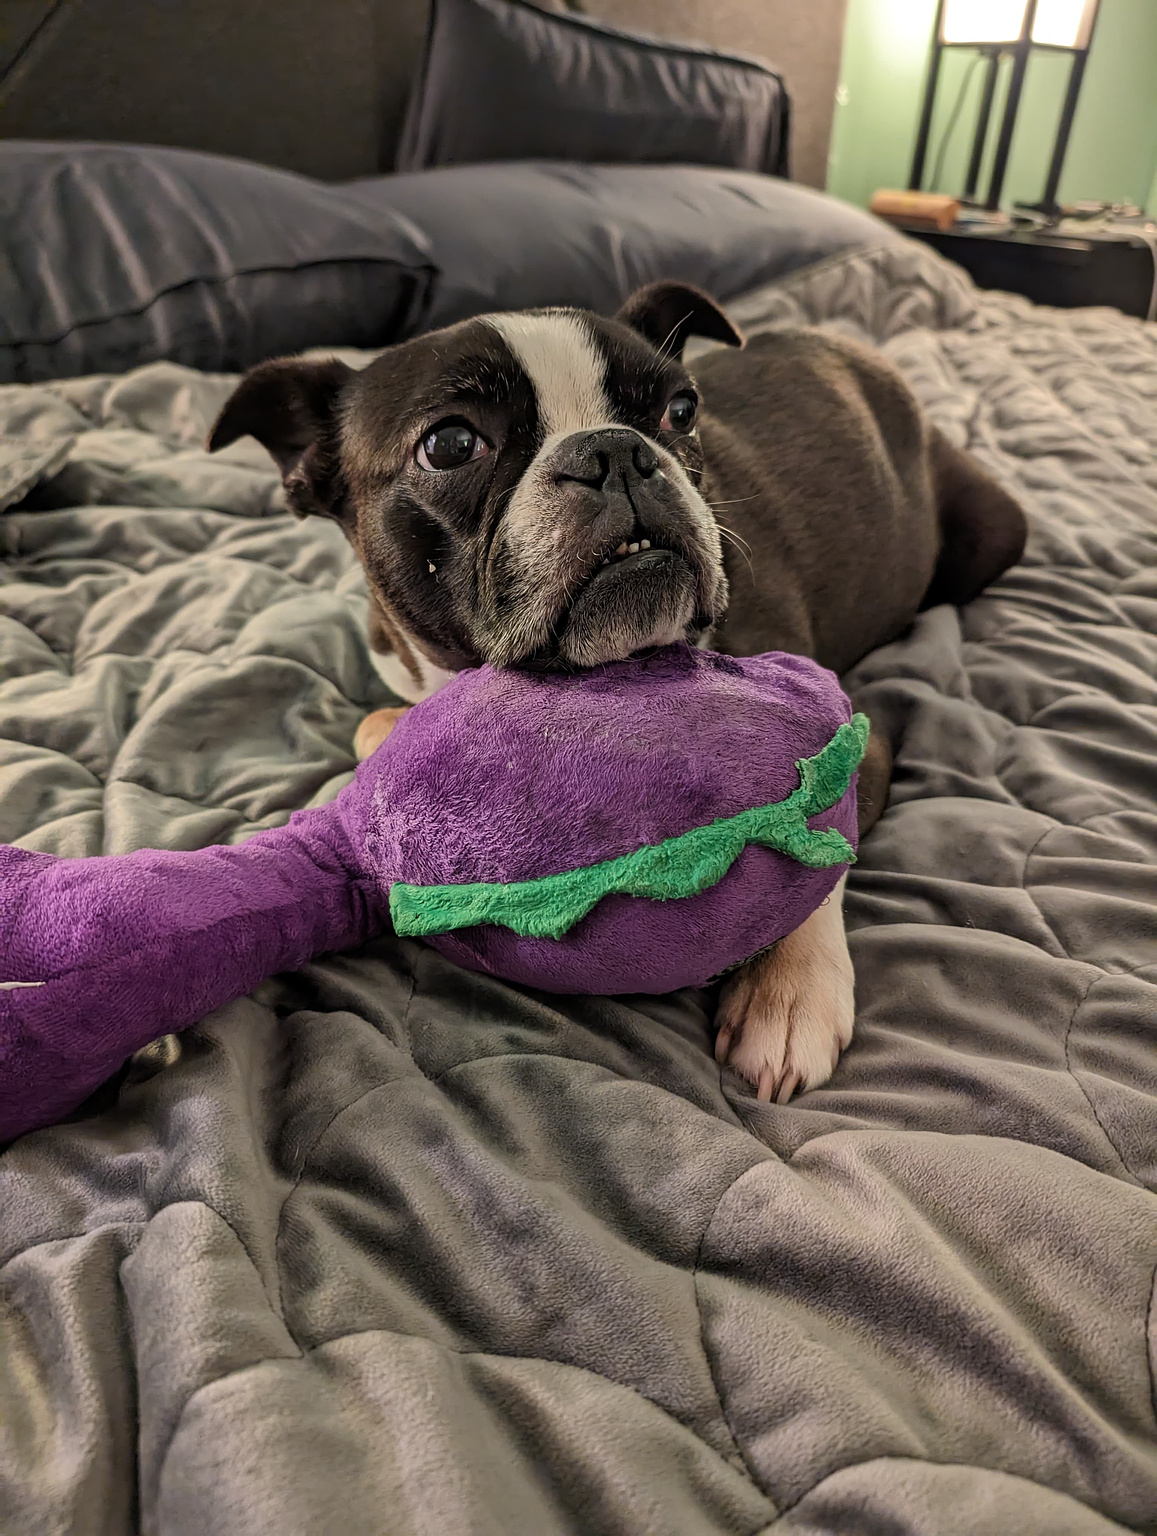 Pippin the Boston terrier resting his head on his best friend, a purple plush dinosaur.